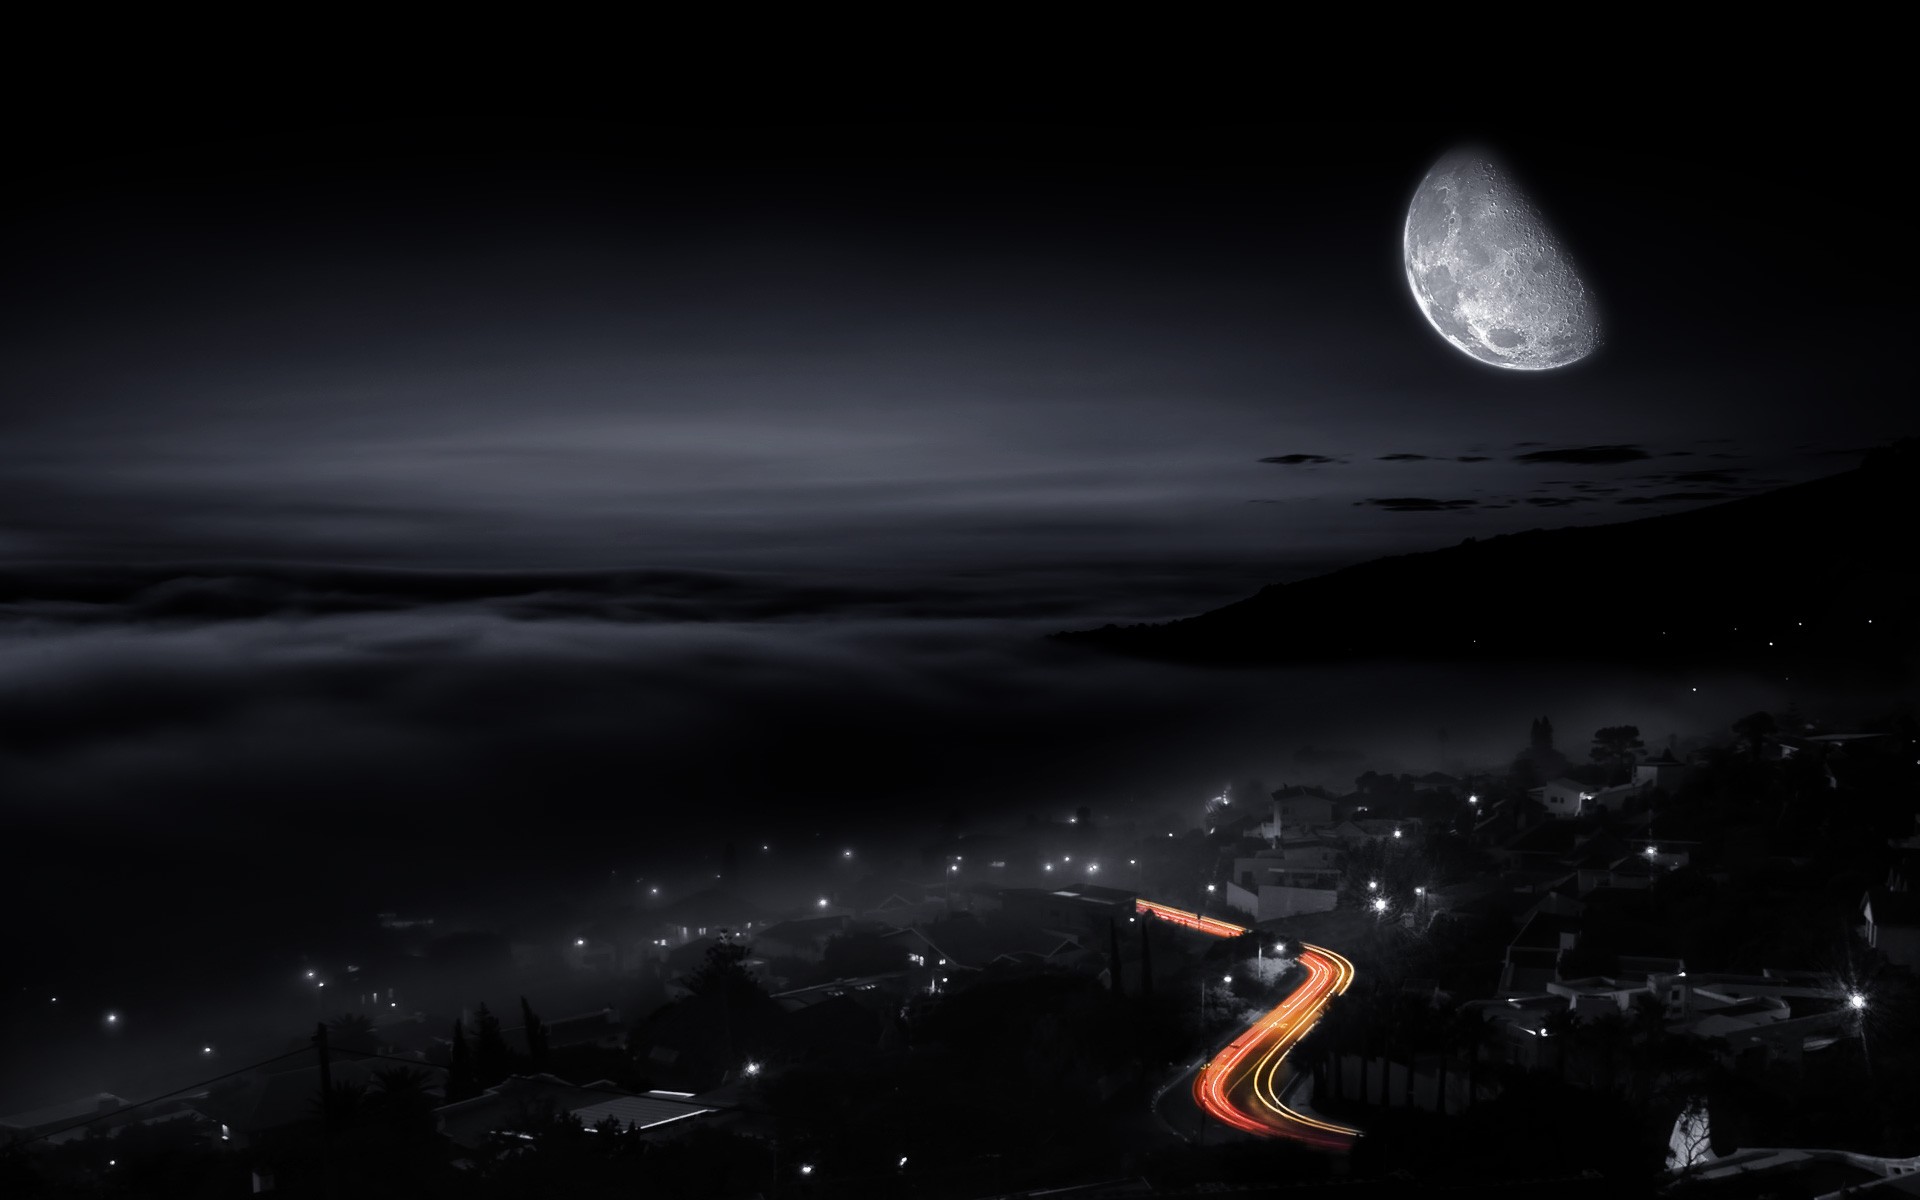 Free photo Wallpaper depicting the moon over a city at night